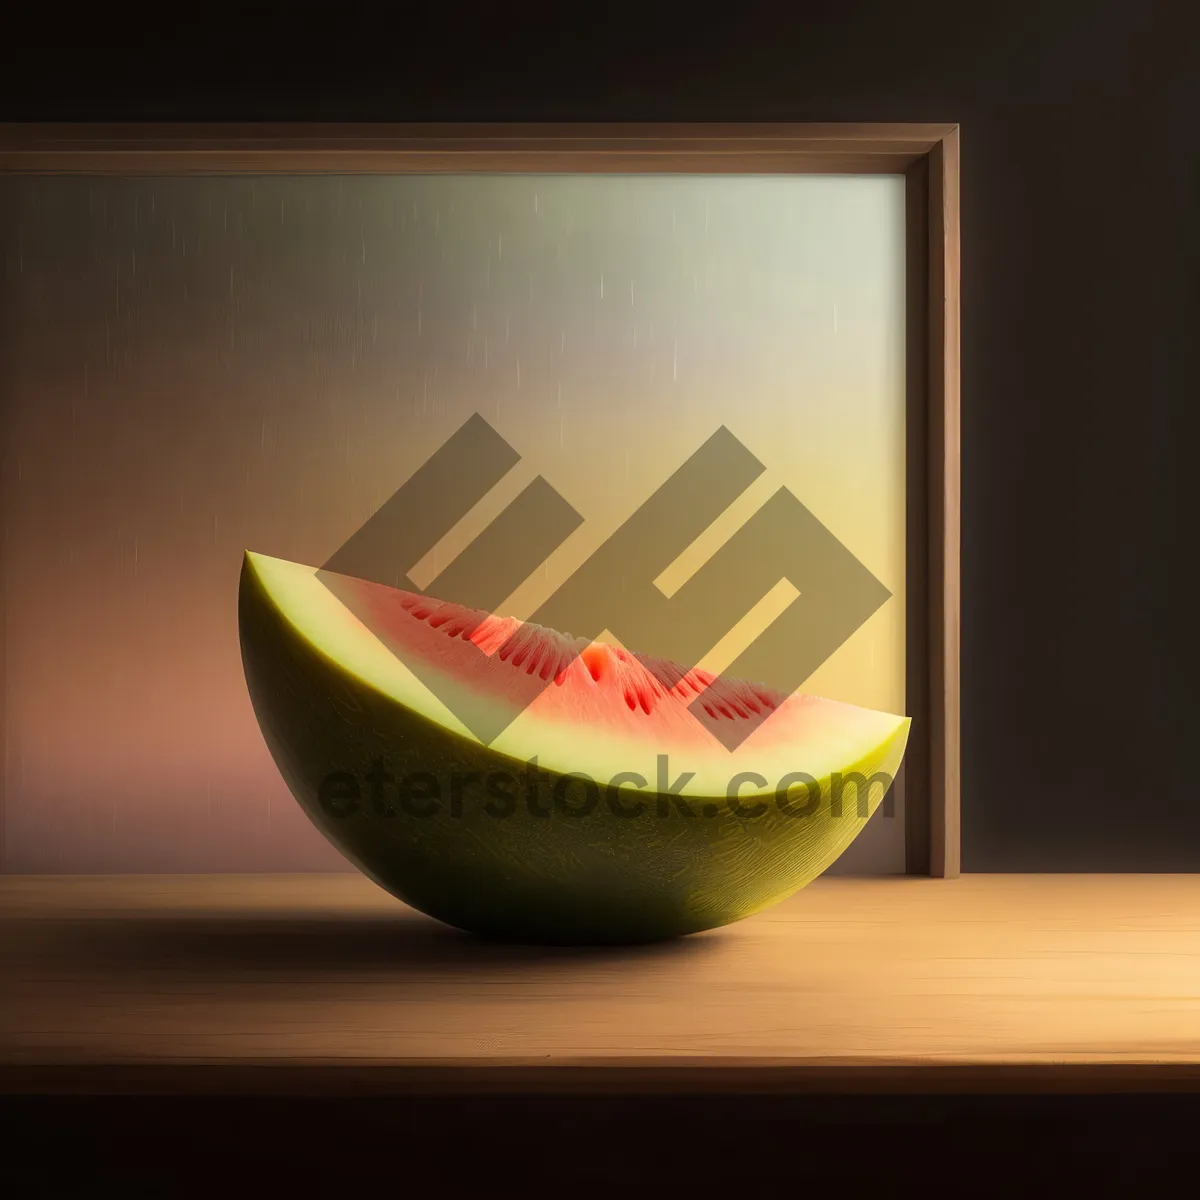 Picture of Refreshing Avocado Watermelon Bowl with Sweet Citrus Slices